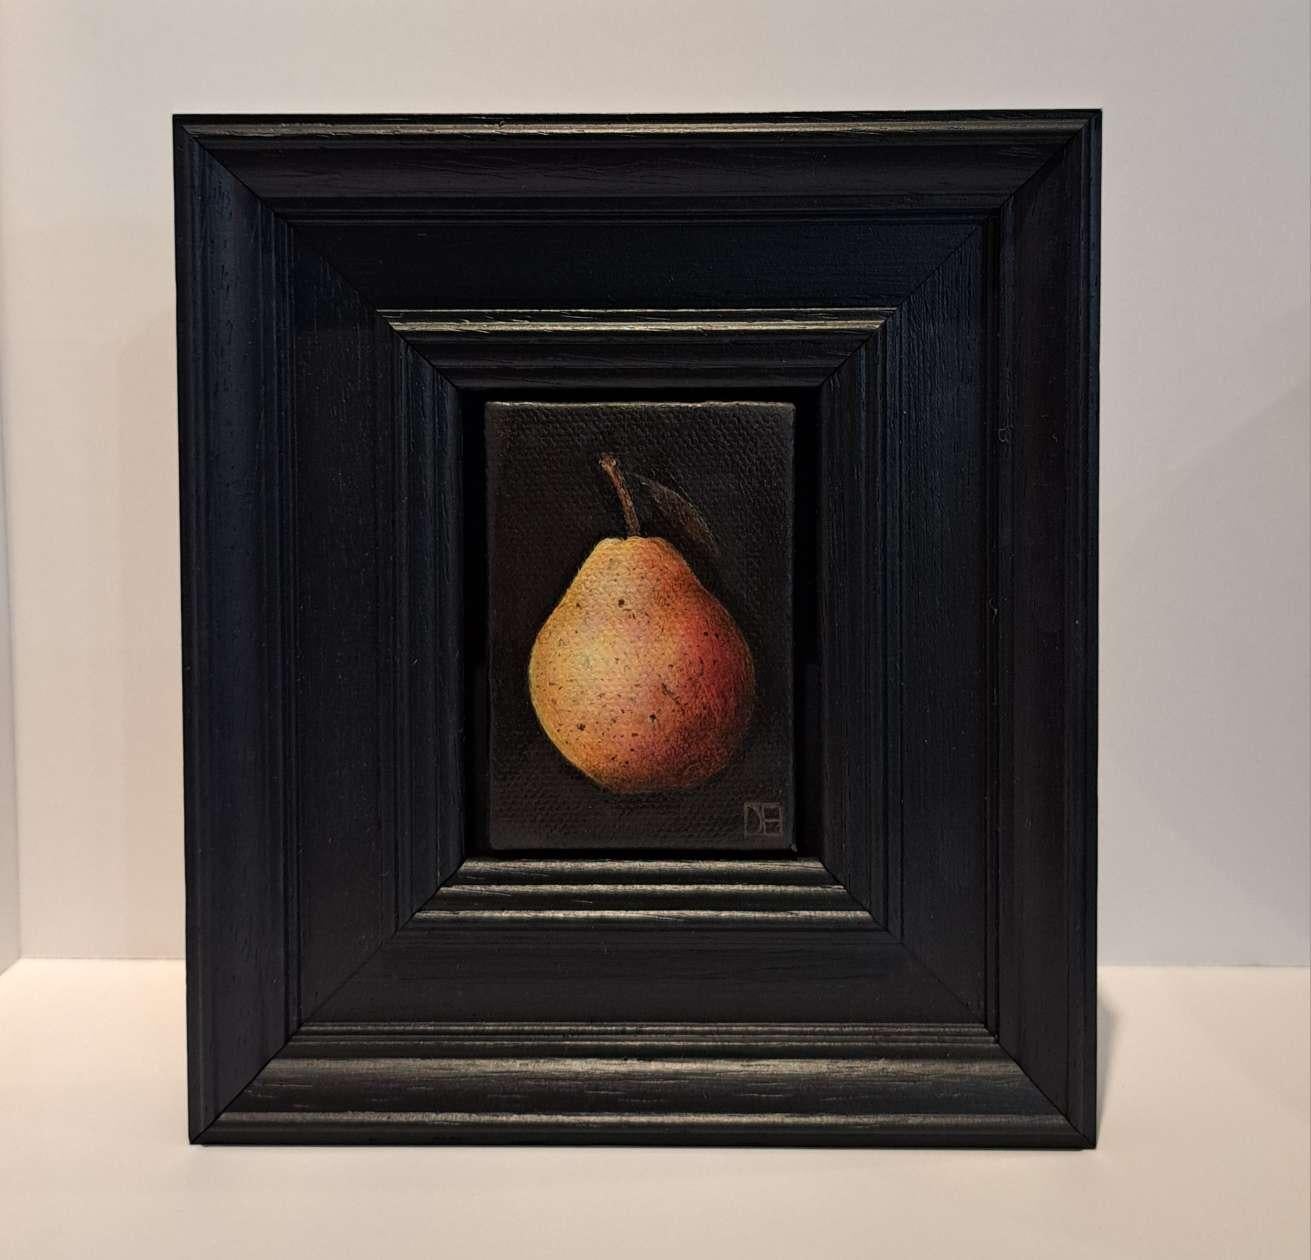 Pocket Blush Pear 3 c is an original oil painting by Dani Humberstone as part of her Pocket Painting series featuring small scale realistic oil paintings, with a nod to baroque still life painting. The paintings are set in a black wood layered